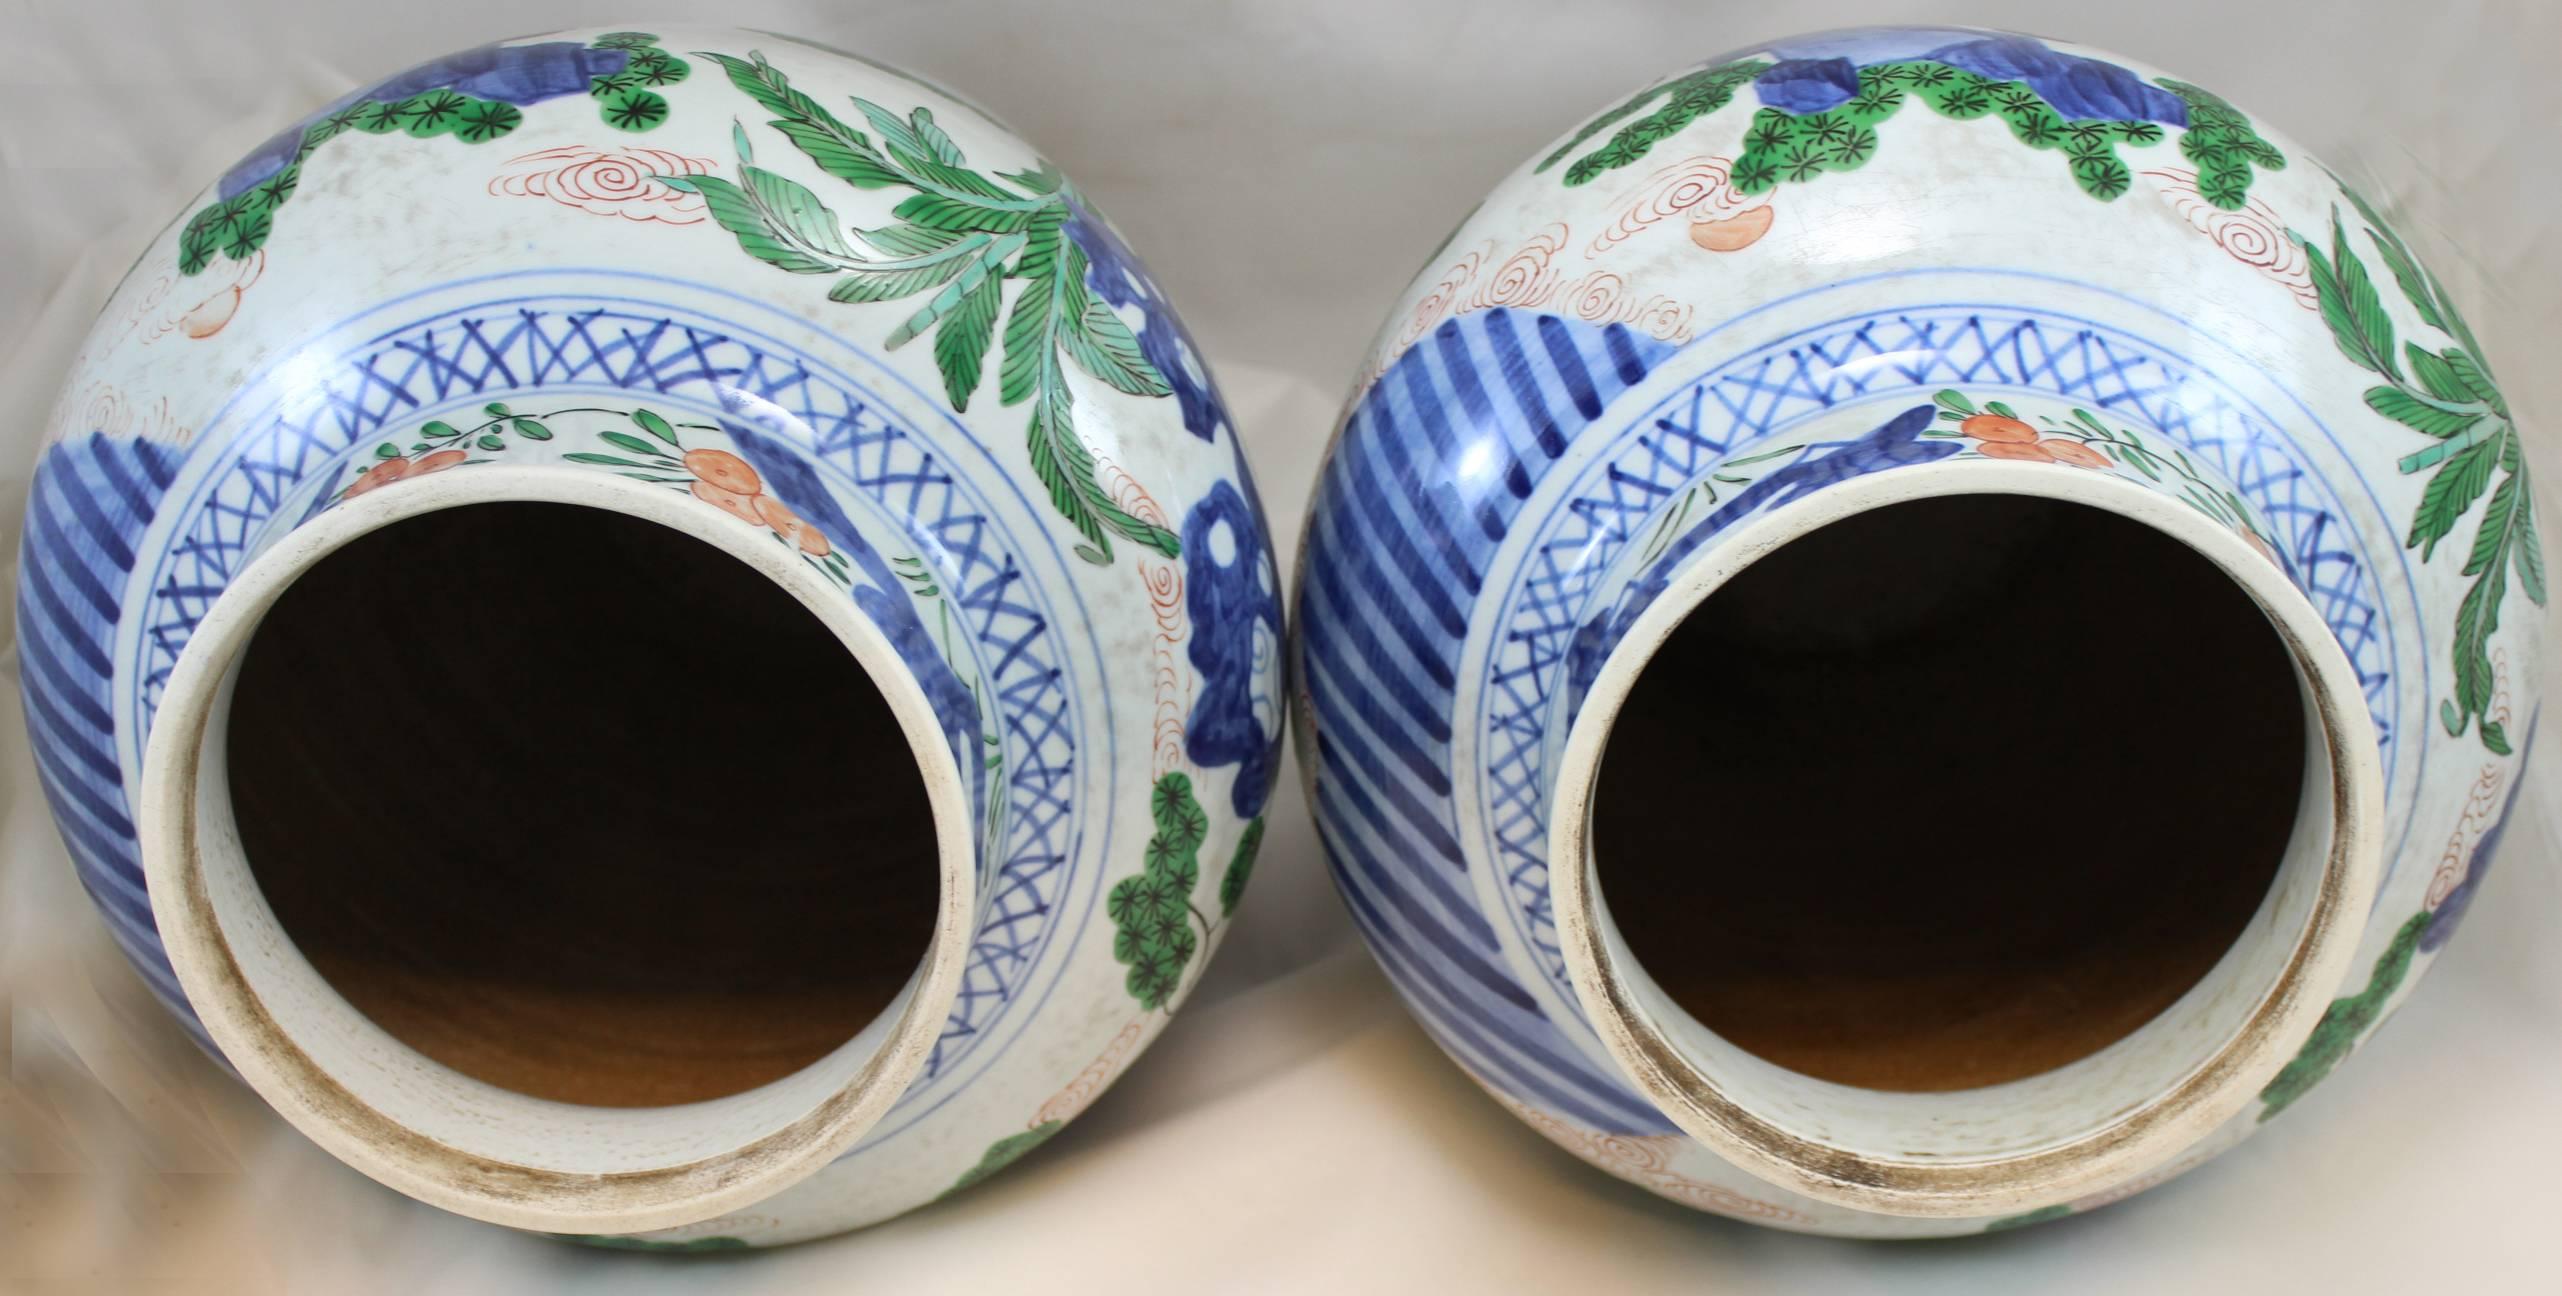 Pair of 19th Century Chinese Qing Dynasty Polychrome Covered Porcelain Jars 2